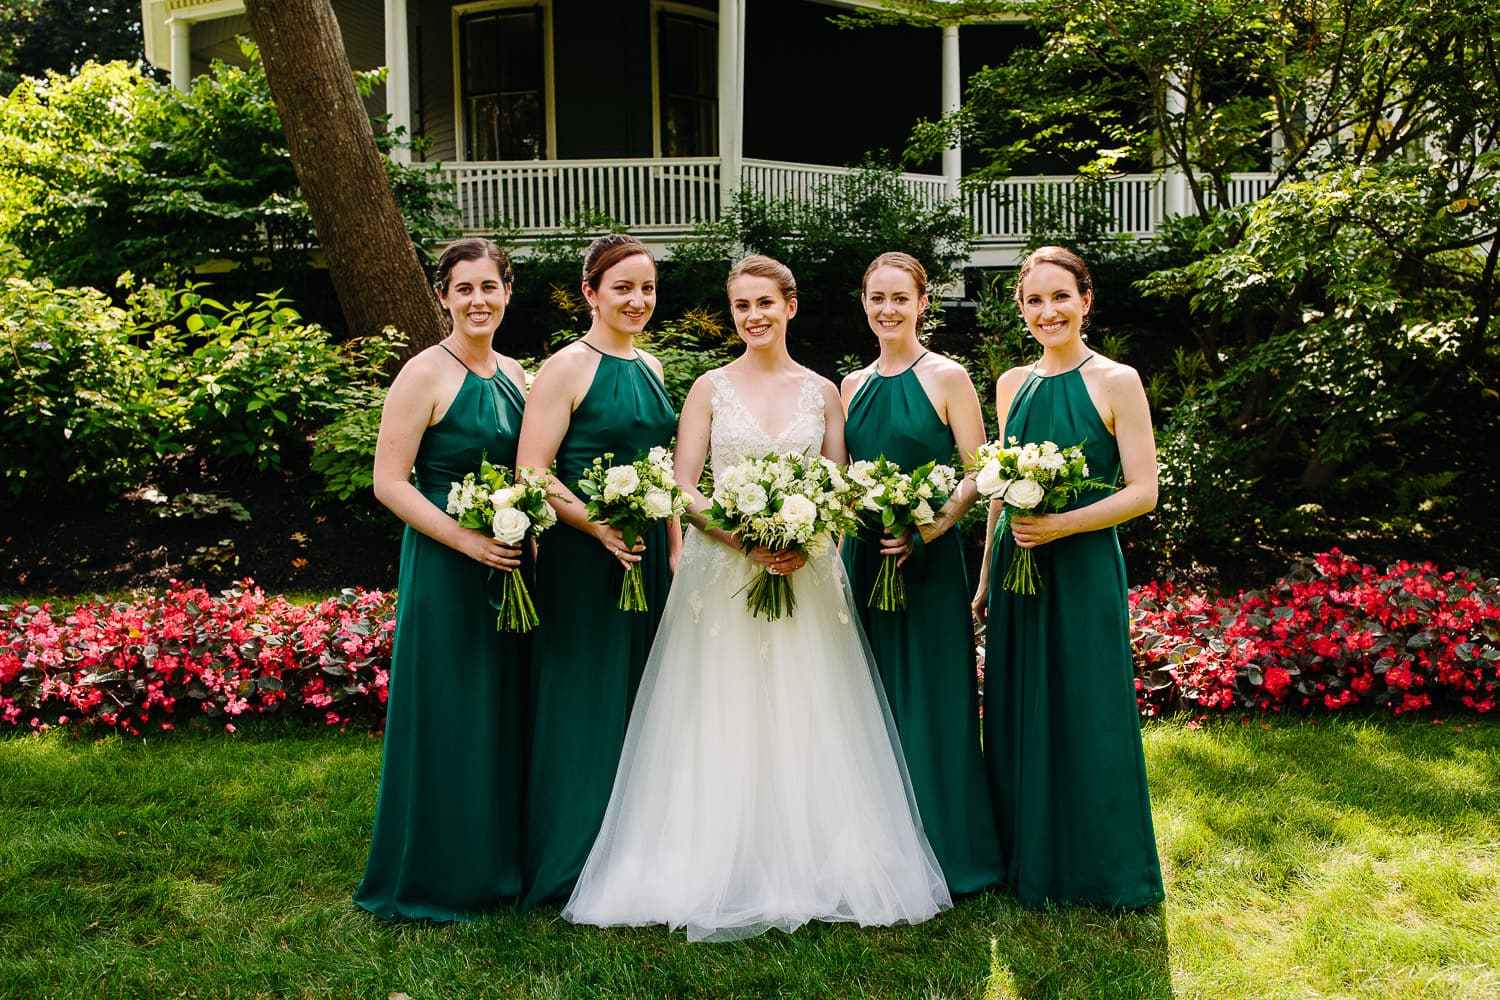 Getting ready for the wedding at home in Hingham, MA | Kelly Benvenuto Photography | Boston wedding photographer